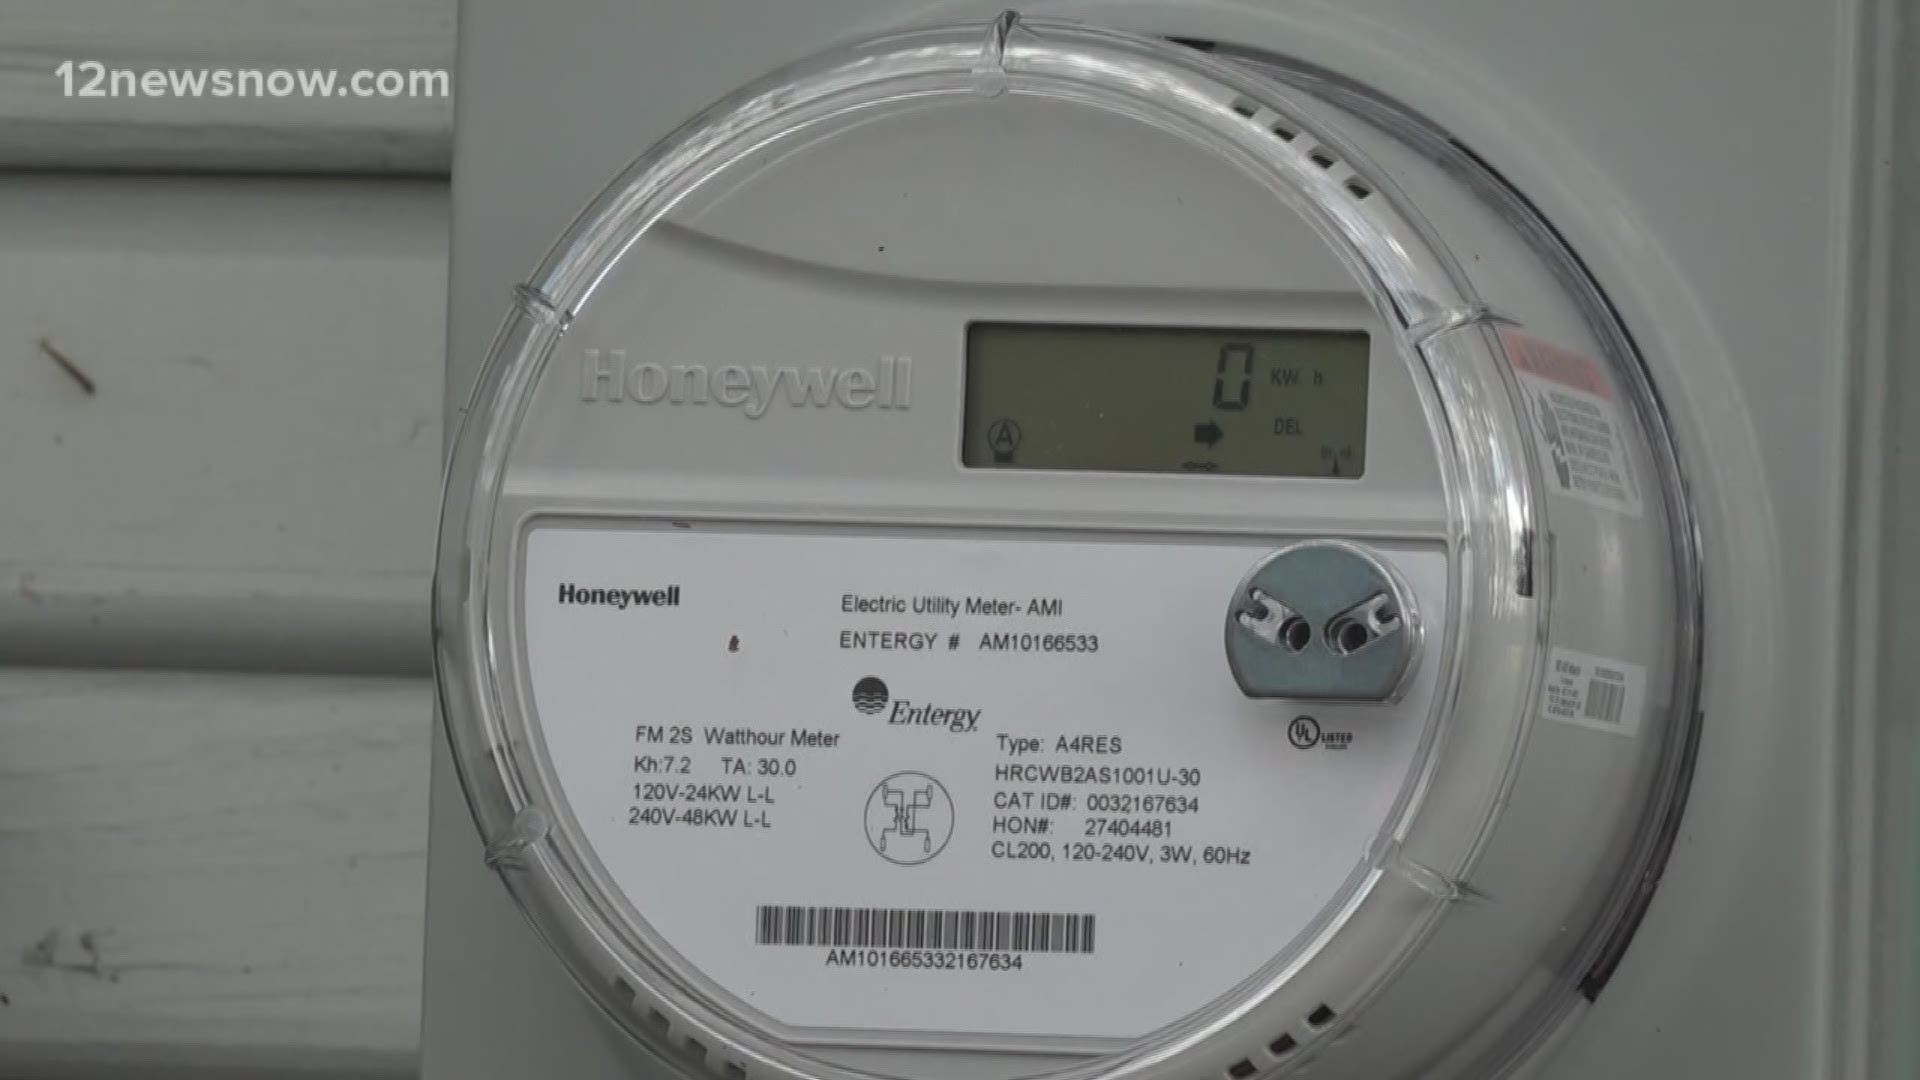 One Beaumont resident said her bill from Entergy almost doubled from May to September.